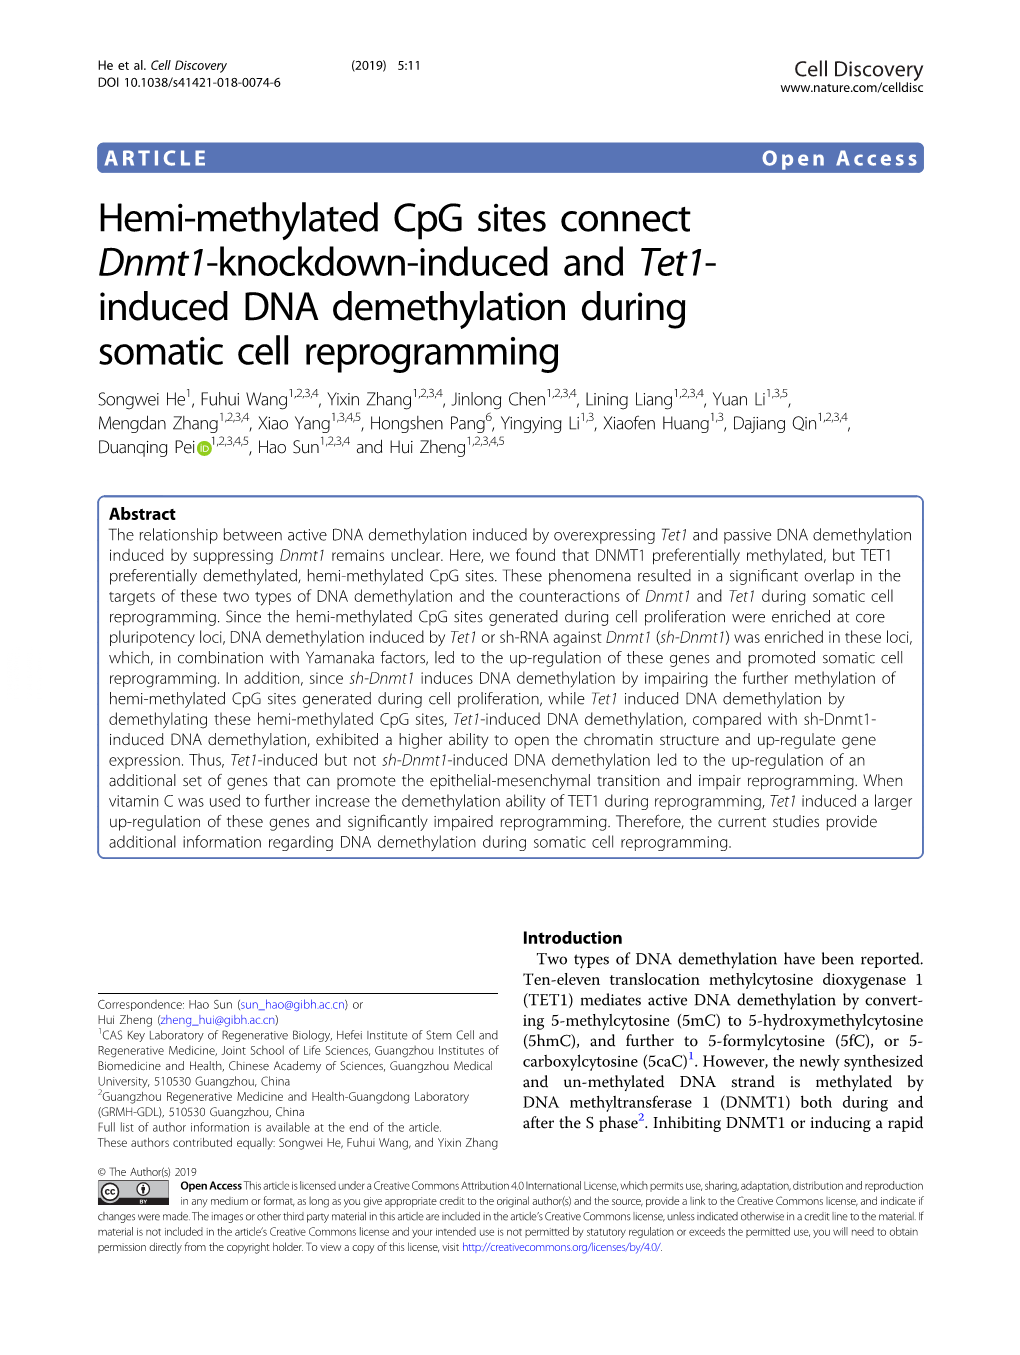 Hemi-Methylated Cpg Sites Connect Dnmt1-Knockdown-Induced and Tet1-Induced DNA Demethylation During Somatic Cell Reprogramming